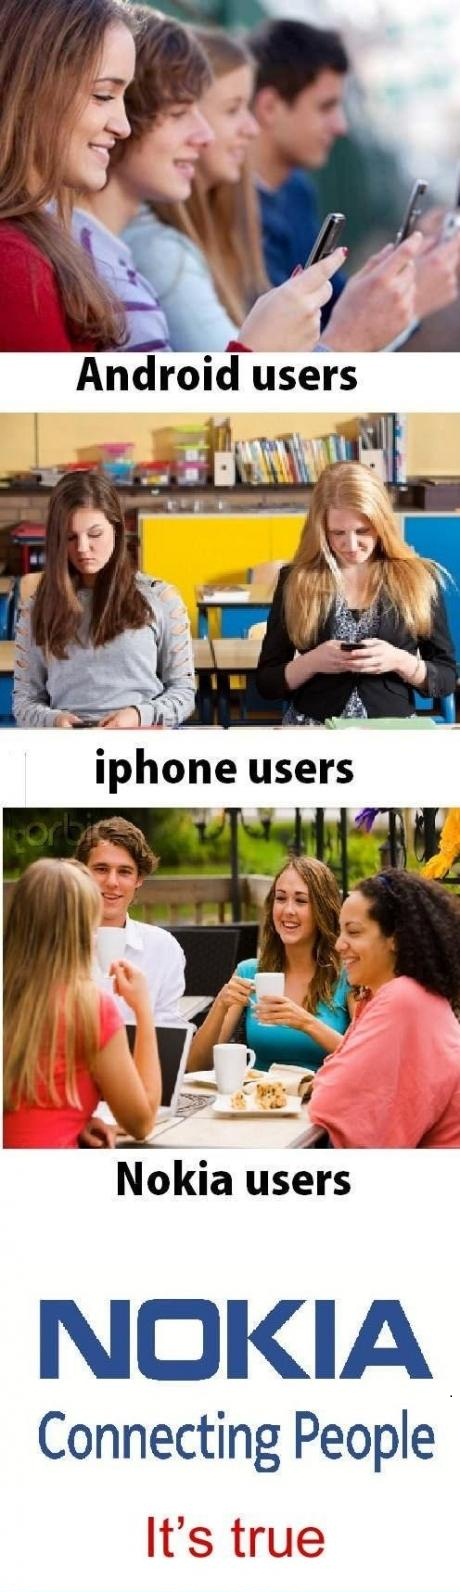 iphone users and nokia users